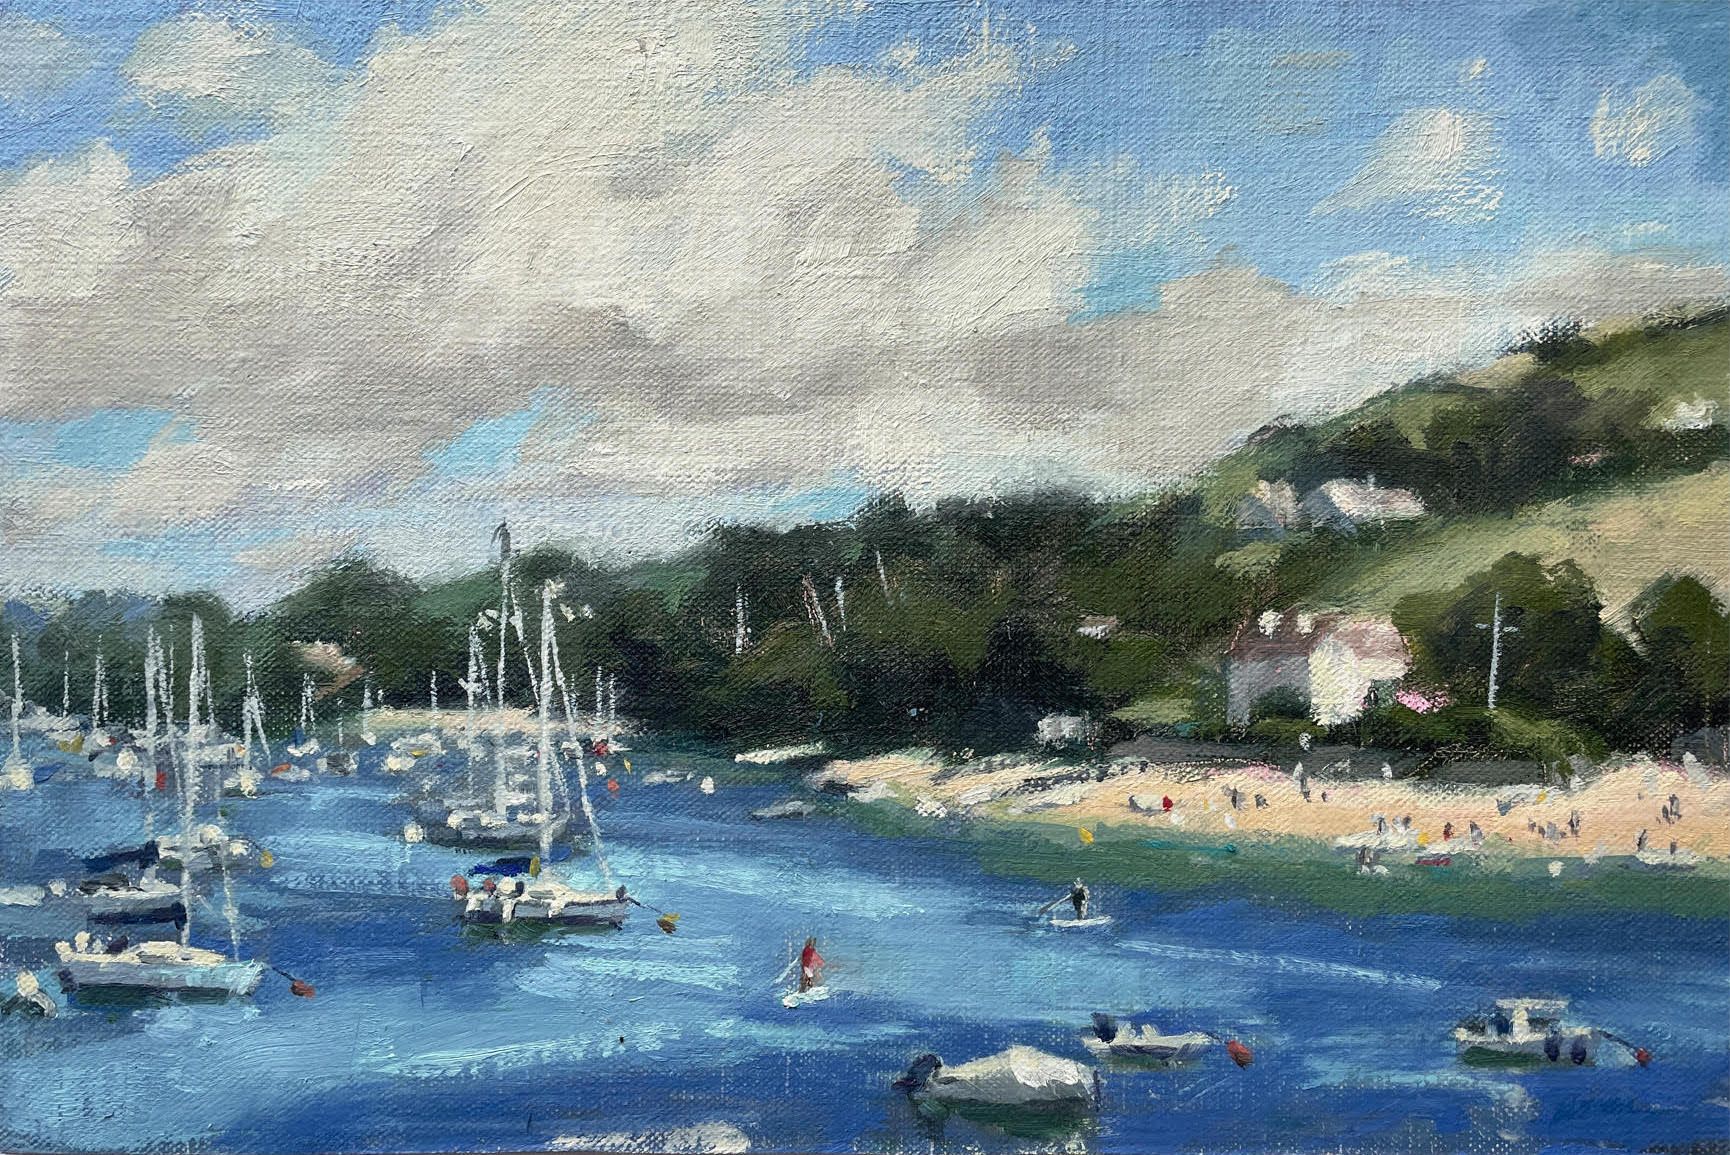 Summer in Salcombe by Fiona Carver